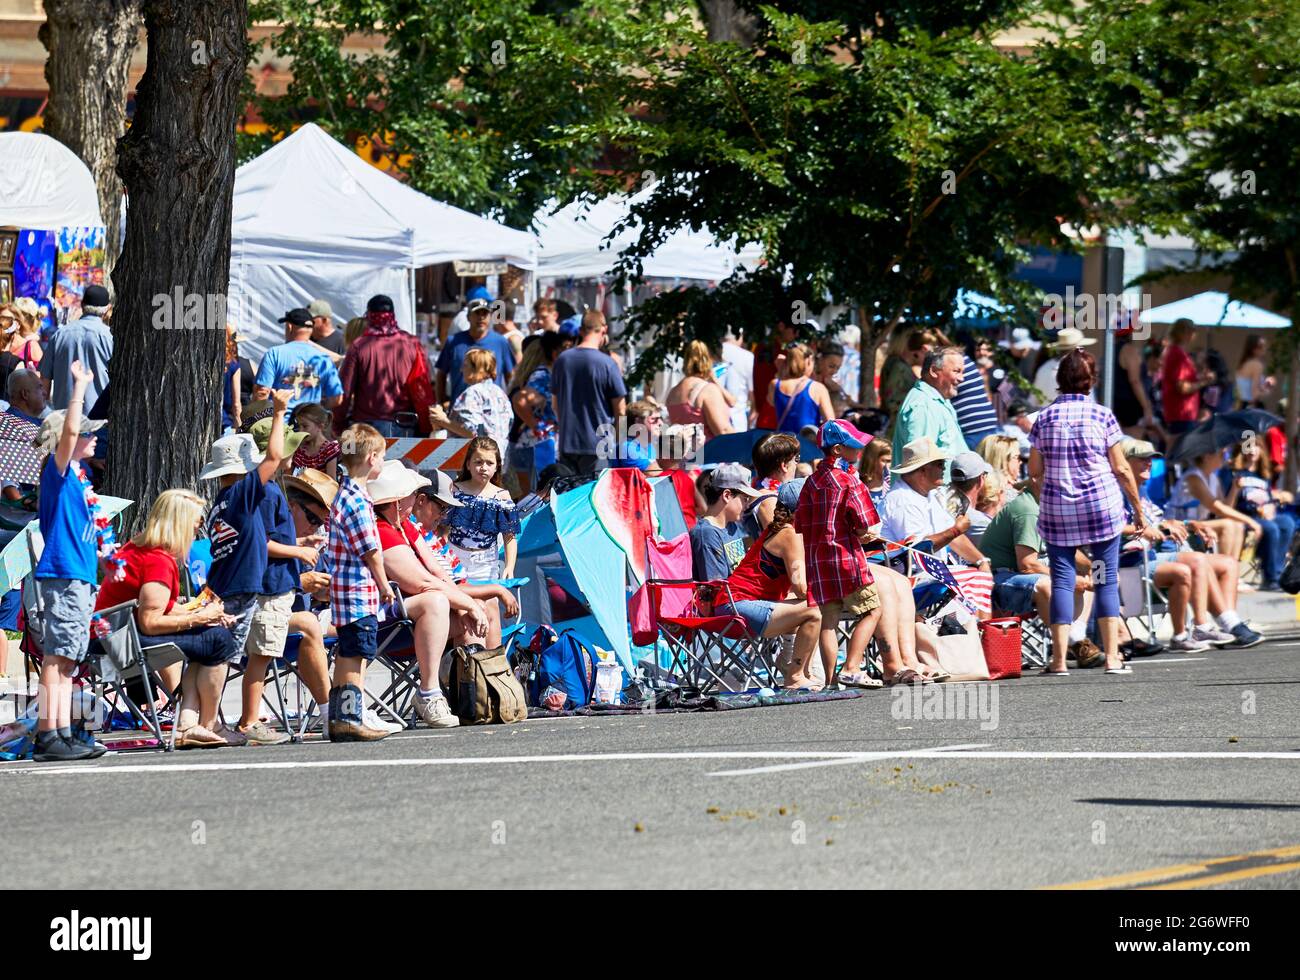 Prescott, Arizona, USA - July 3, 2021: Large crowd of spectators waiting for the 4th of July parade Stock Photo